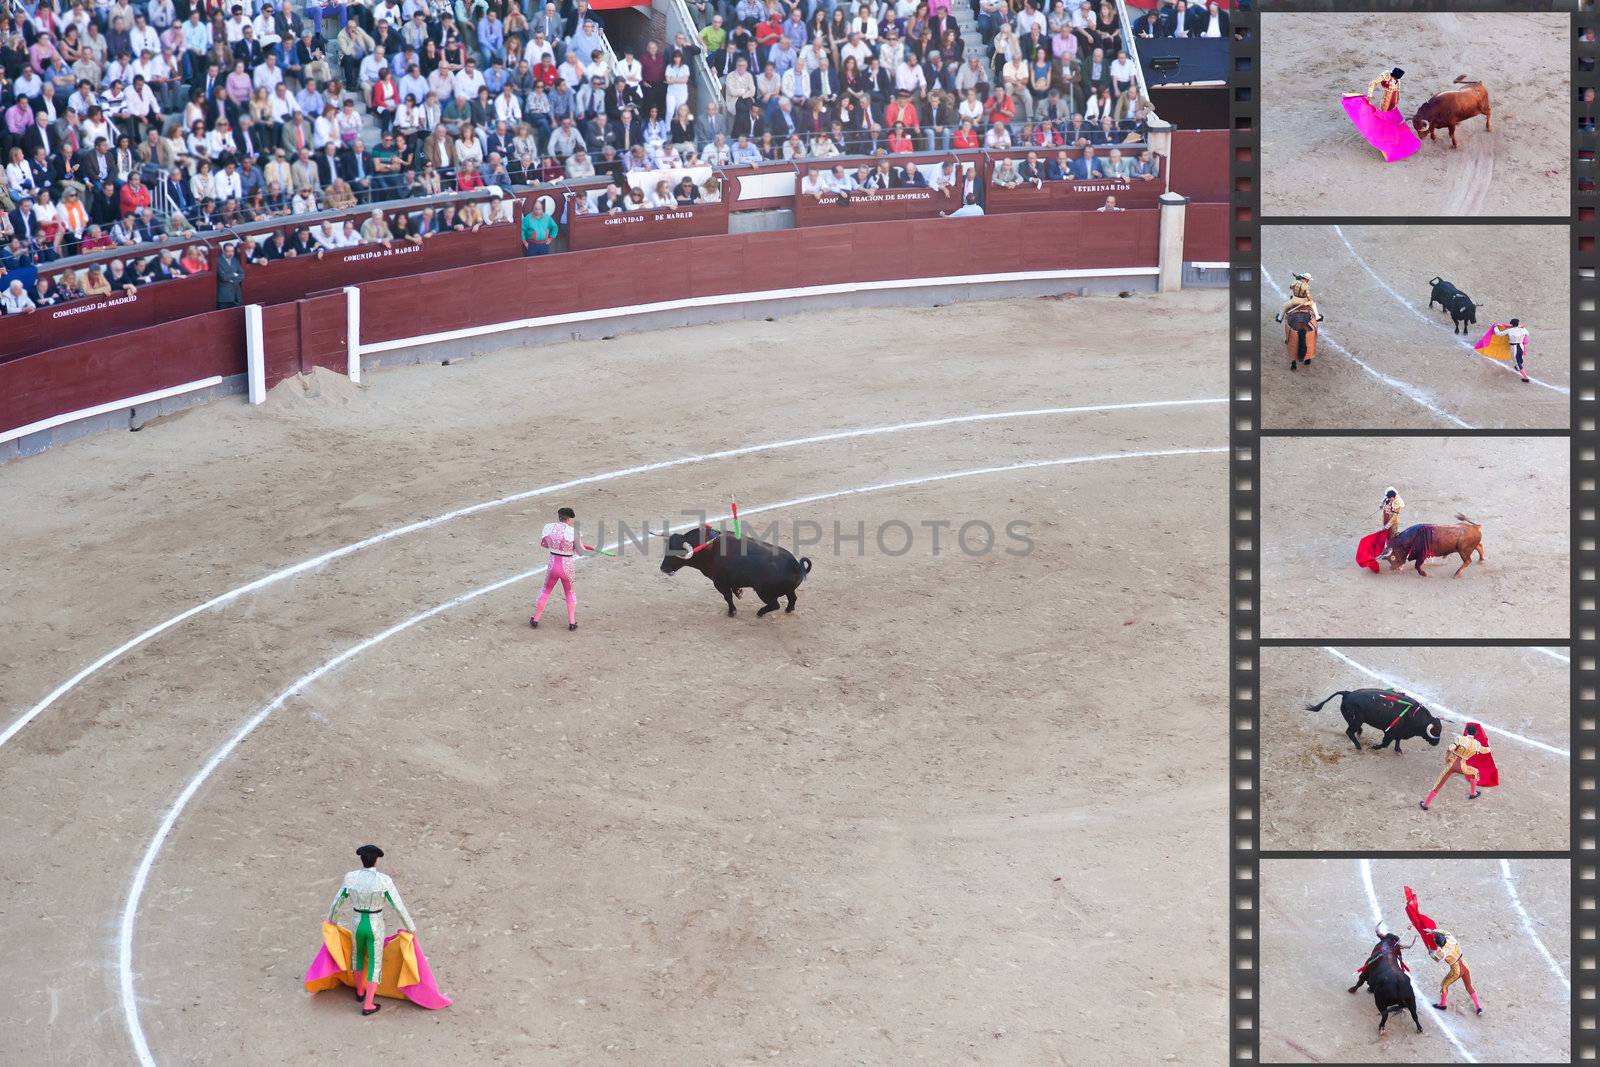 Bullfight - the one of the most controversial events in the world. Some factual images of a bullfight in Madrid, Spain on OCTOBER 1, 2010. 
